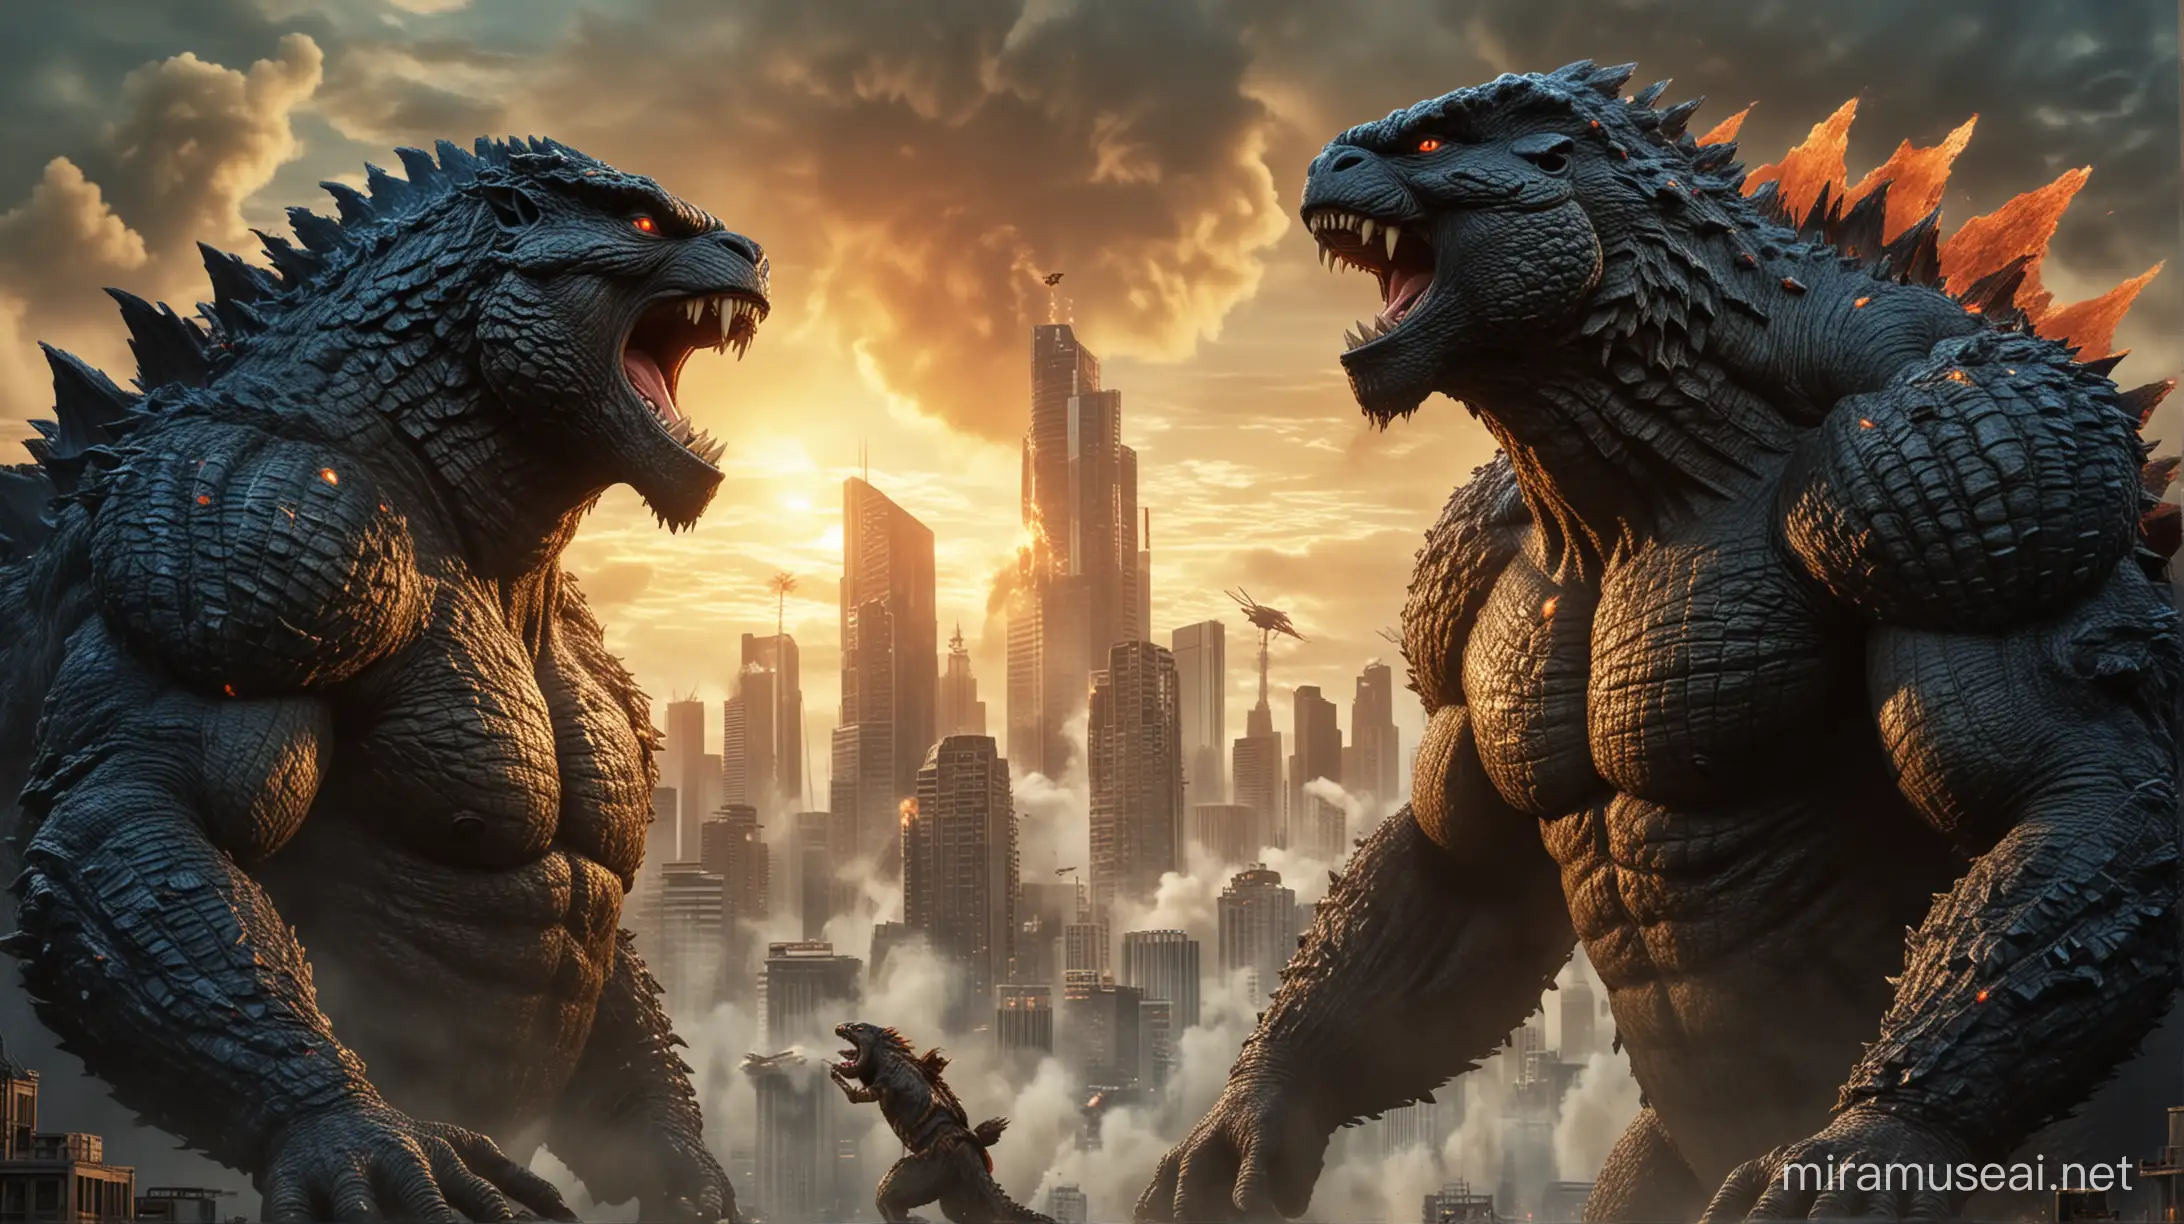 Feature both Godzilla and Kong in a face-off at the center of the thumbnail. Show Godzilla towering in the background with his ferocious roar, and Kong in the foreground with a determined expression, ready to fight.  Use a backdrop of a cityscape in ruins, showcasing the aftermath of their colossal clash.  Illuminate Godzilla and Kong with contrasting colors, such as blue and orange